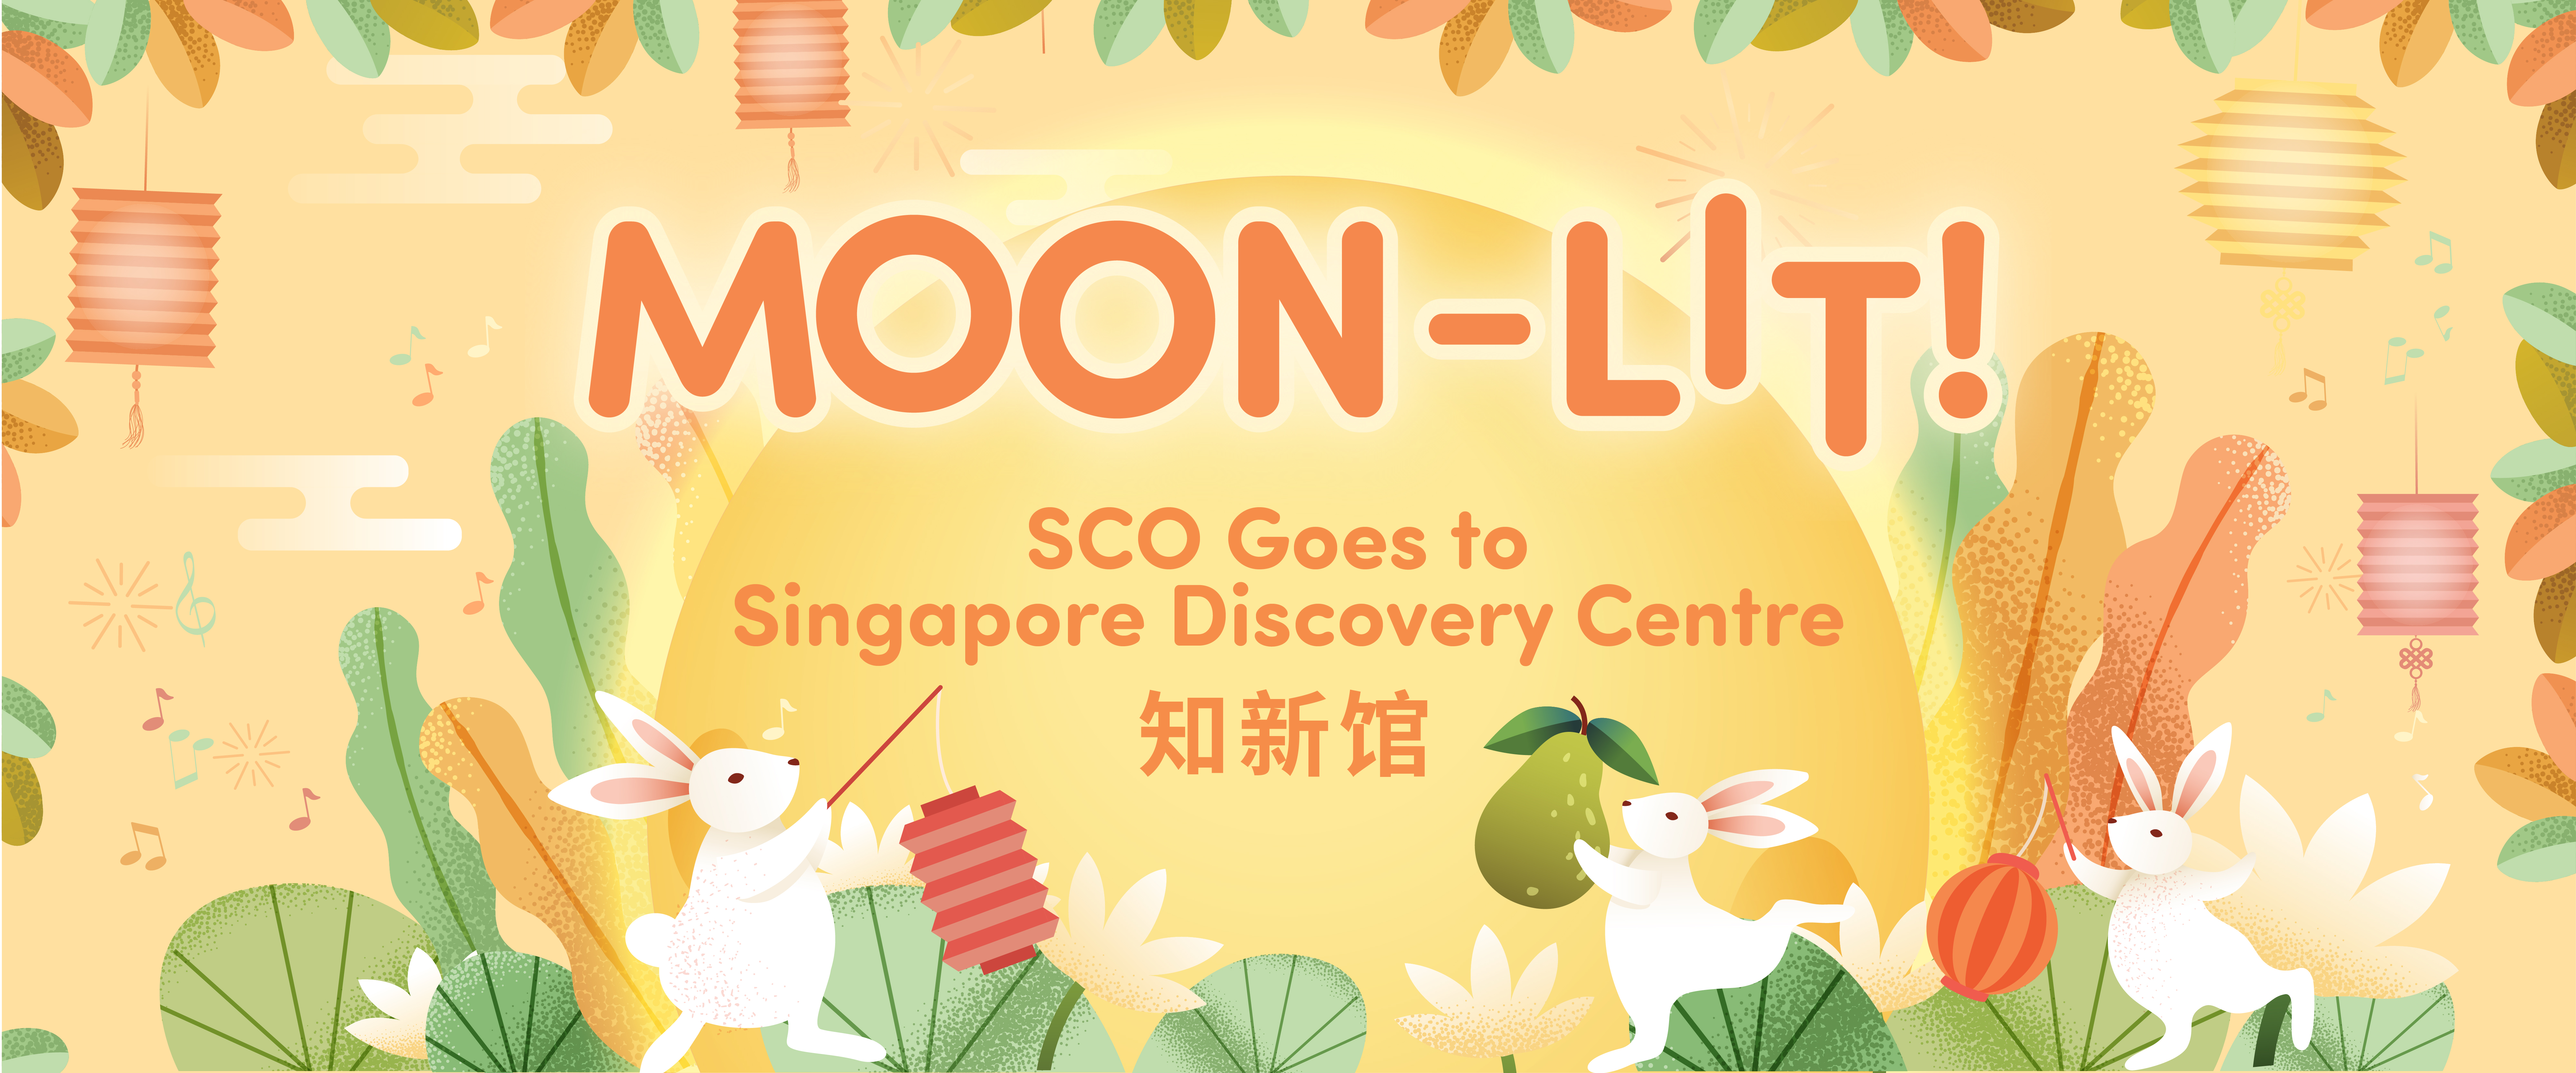 SCO_Website_Banner_1920_x_800px-01 SCO Goes to Singapore Discovery Centre